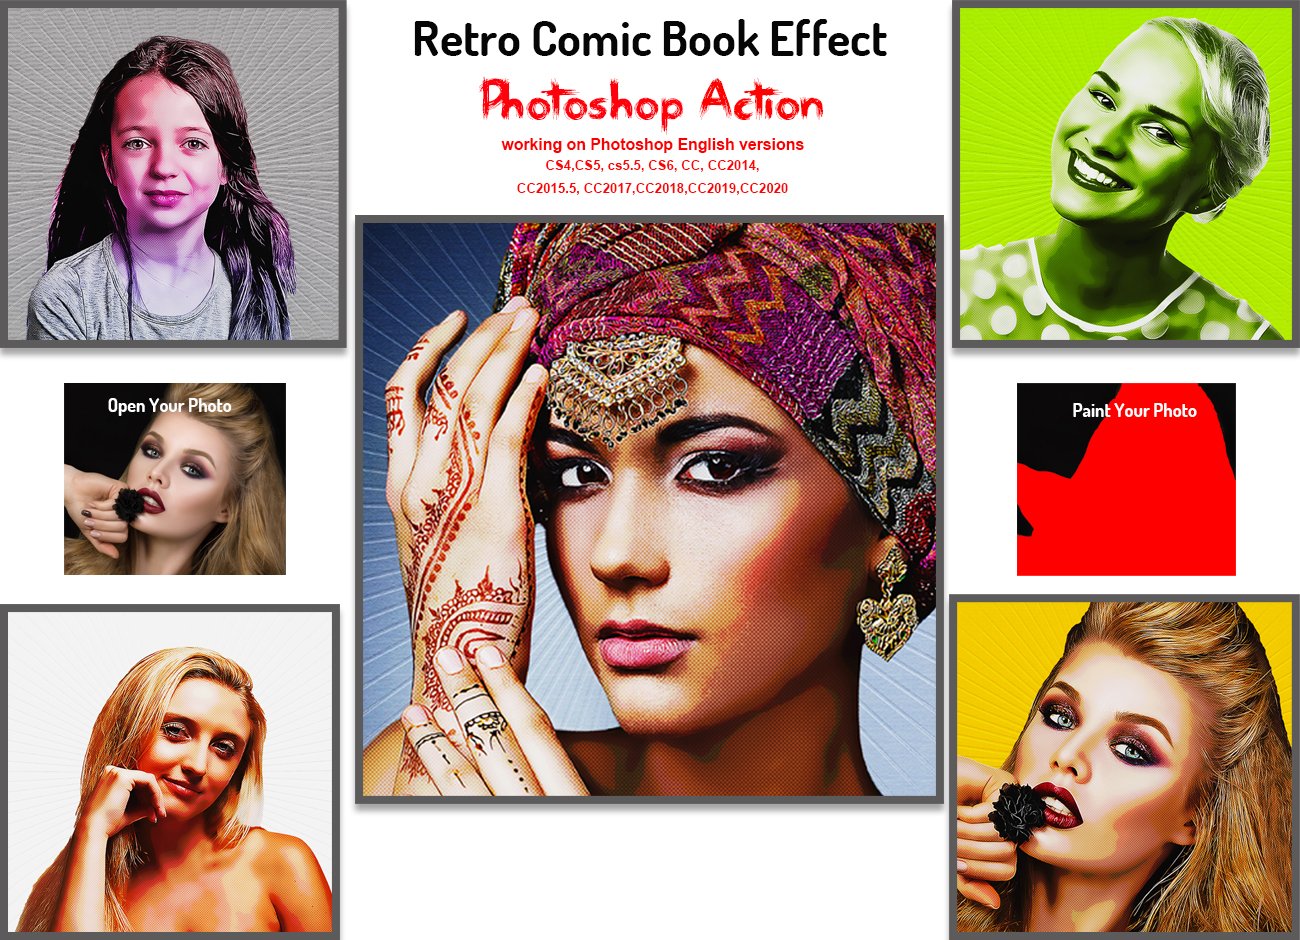 Retro Comic Book Effect PS Actioncover image.